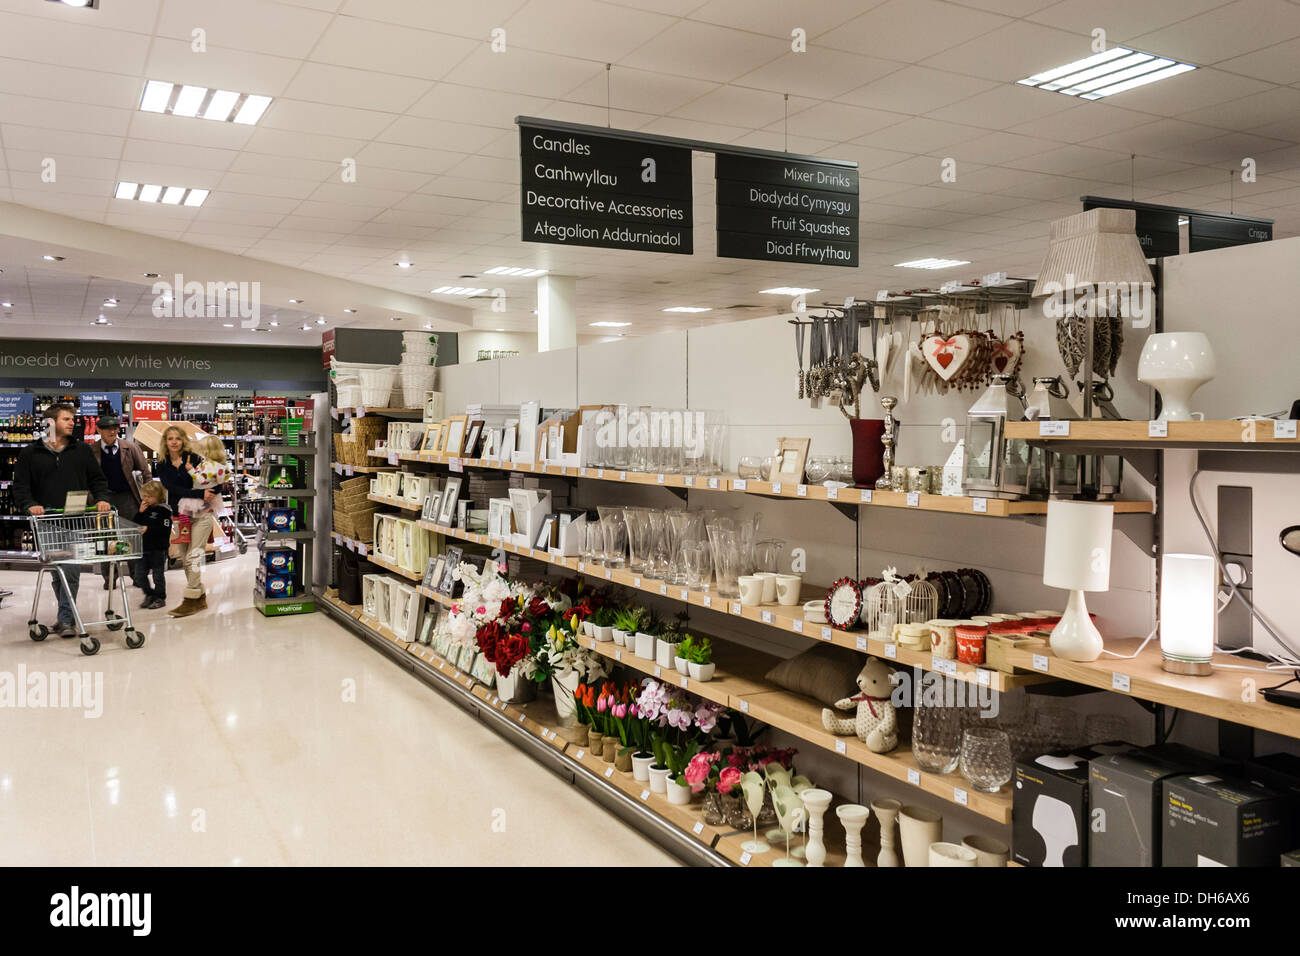 Young family browse the home products section in the aisles of a Waitrose supermarket in Wales with signs in Welsh and English. Stock Photo